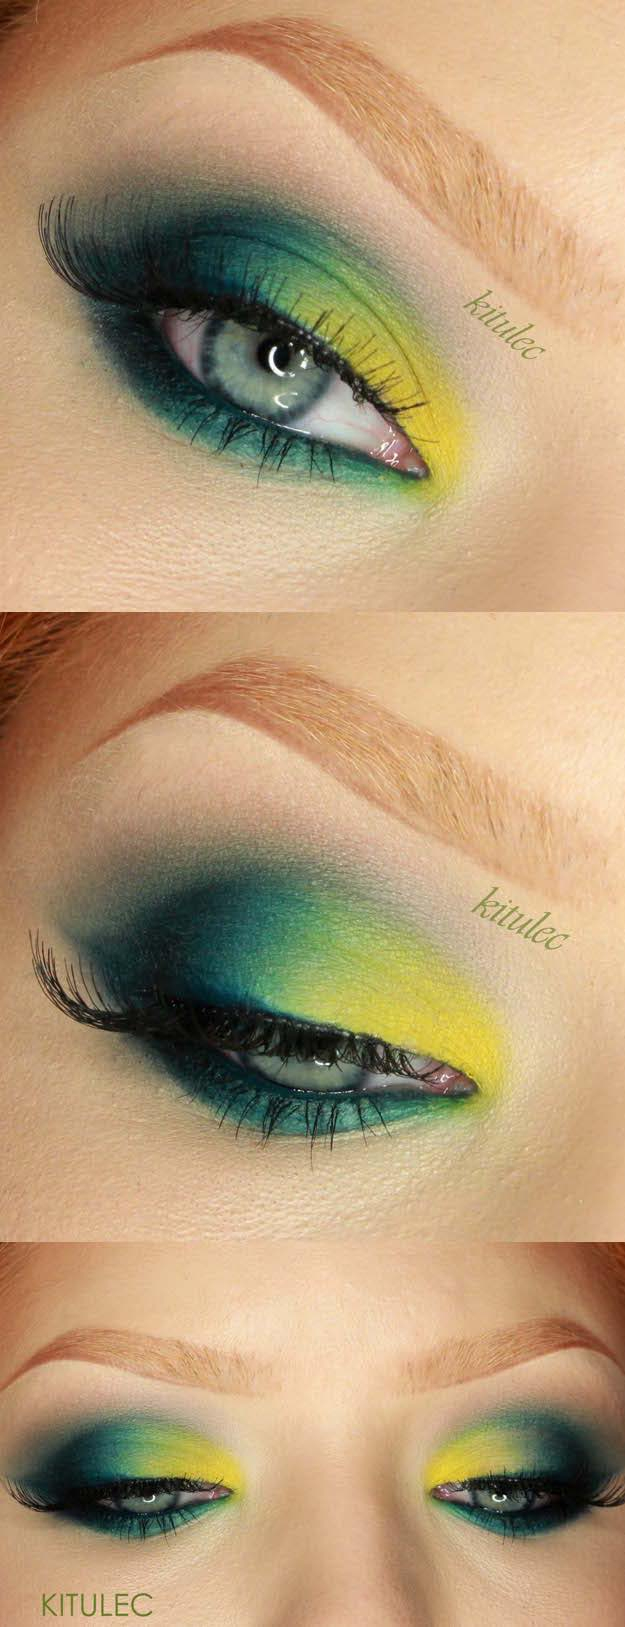 Makeup Ideas For Green Eyes 50 Perfect Makeup Tutorials For Green Eyes The Goddess